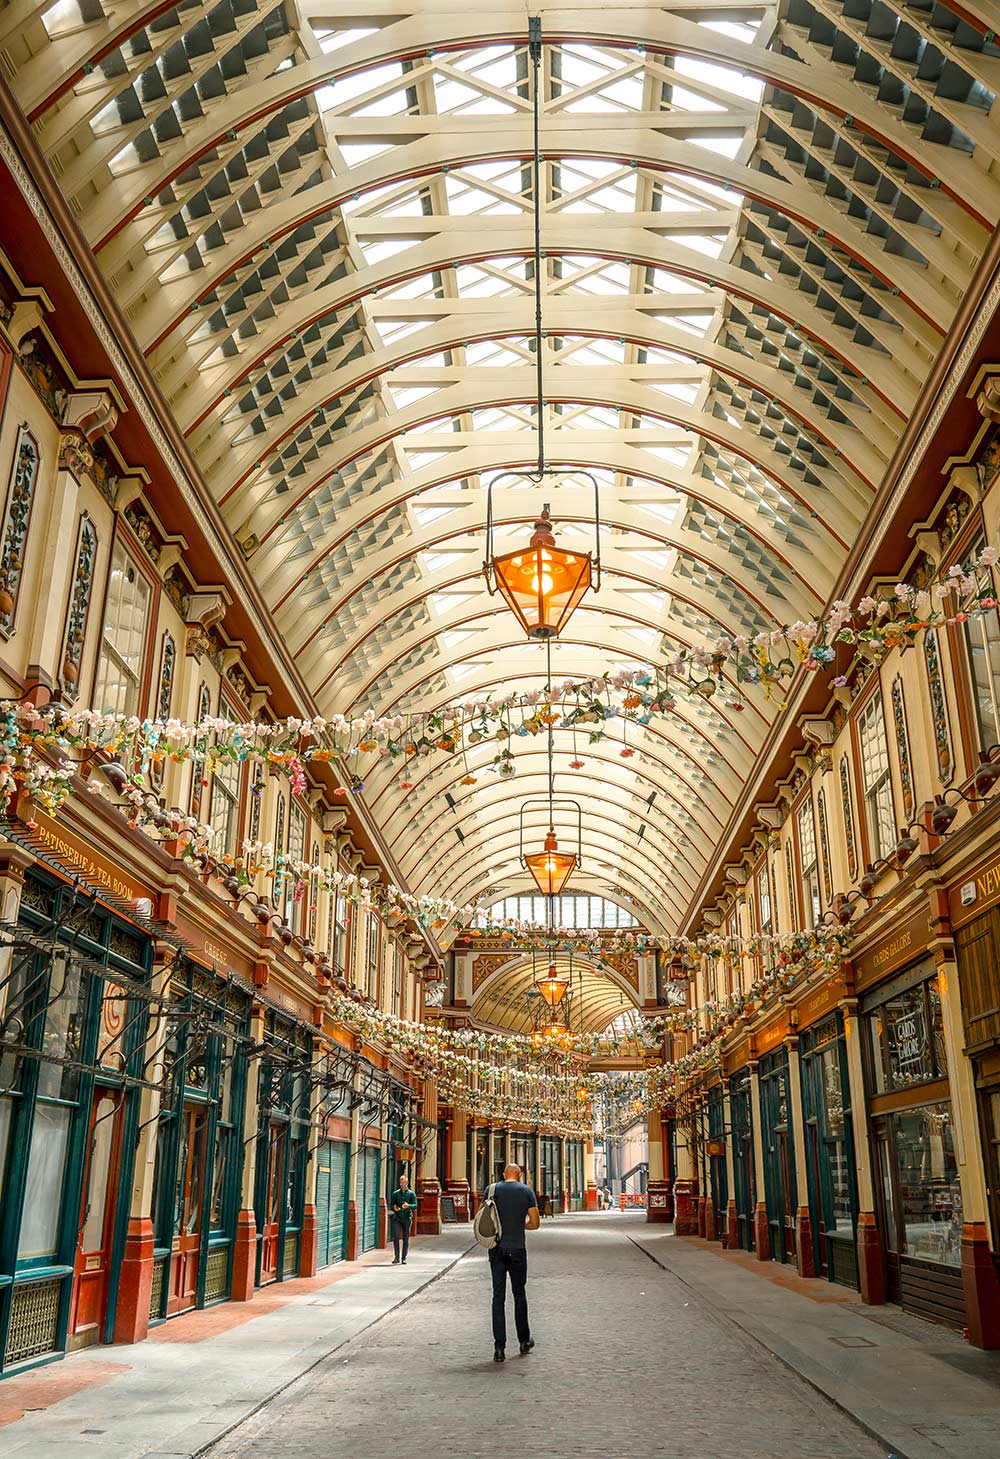 Guide to Leadenhall market in London